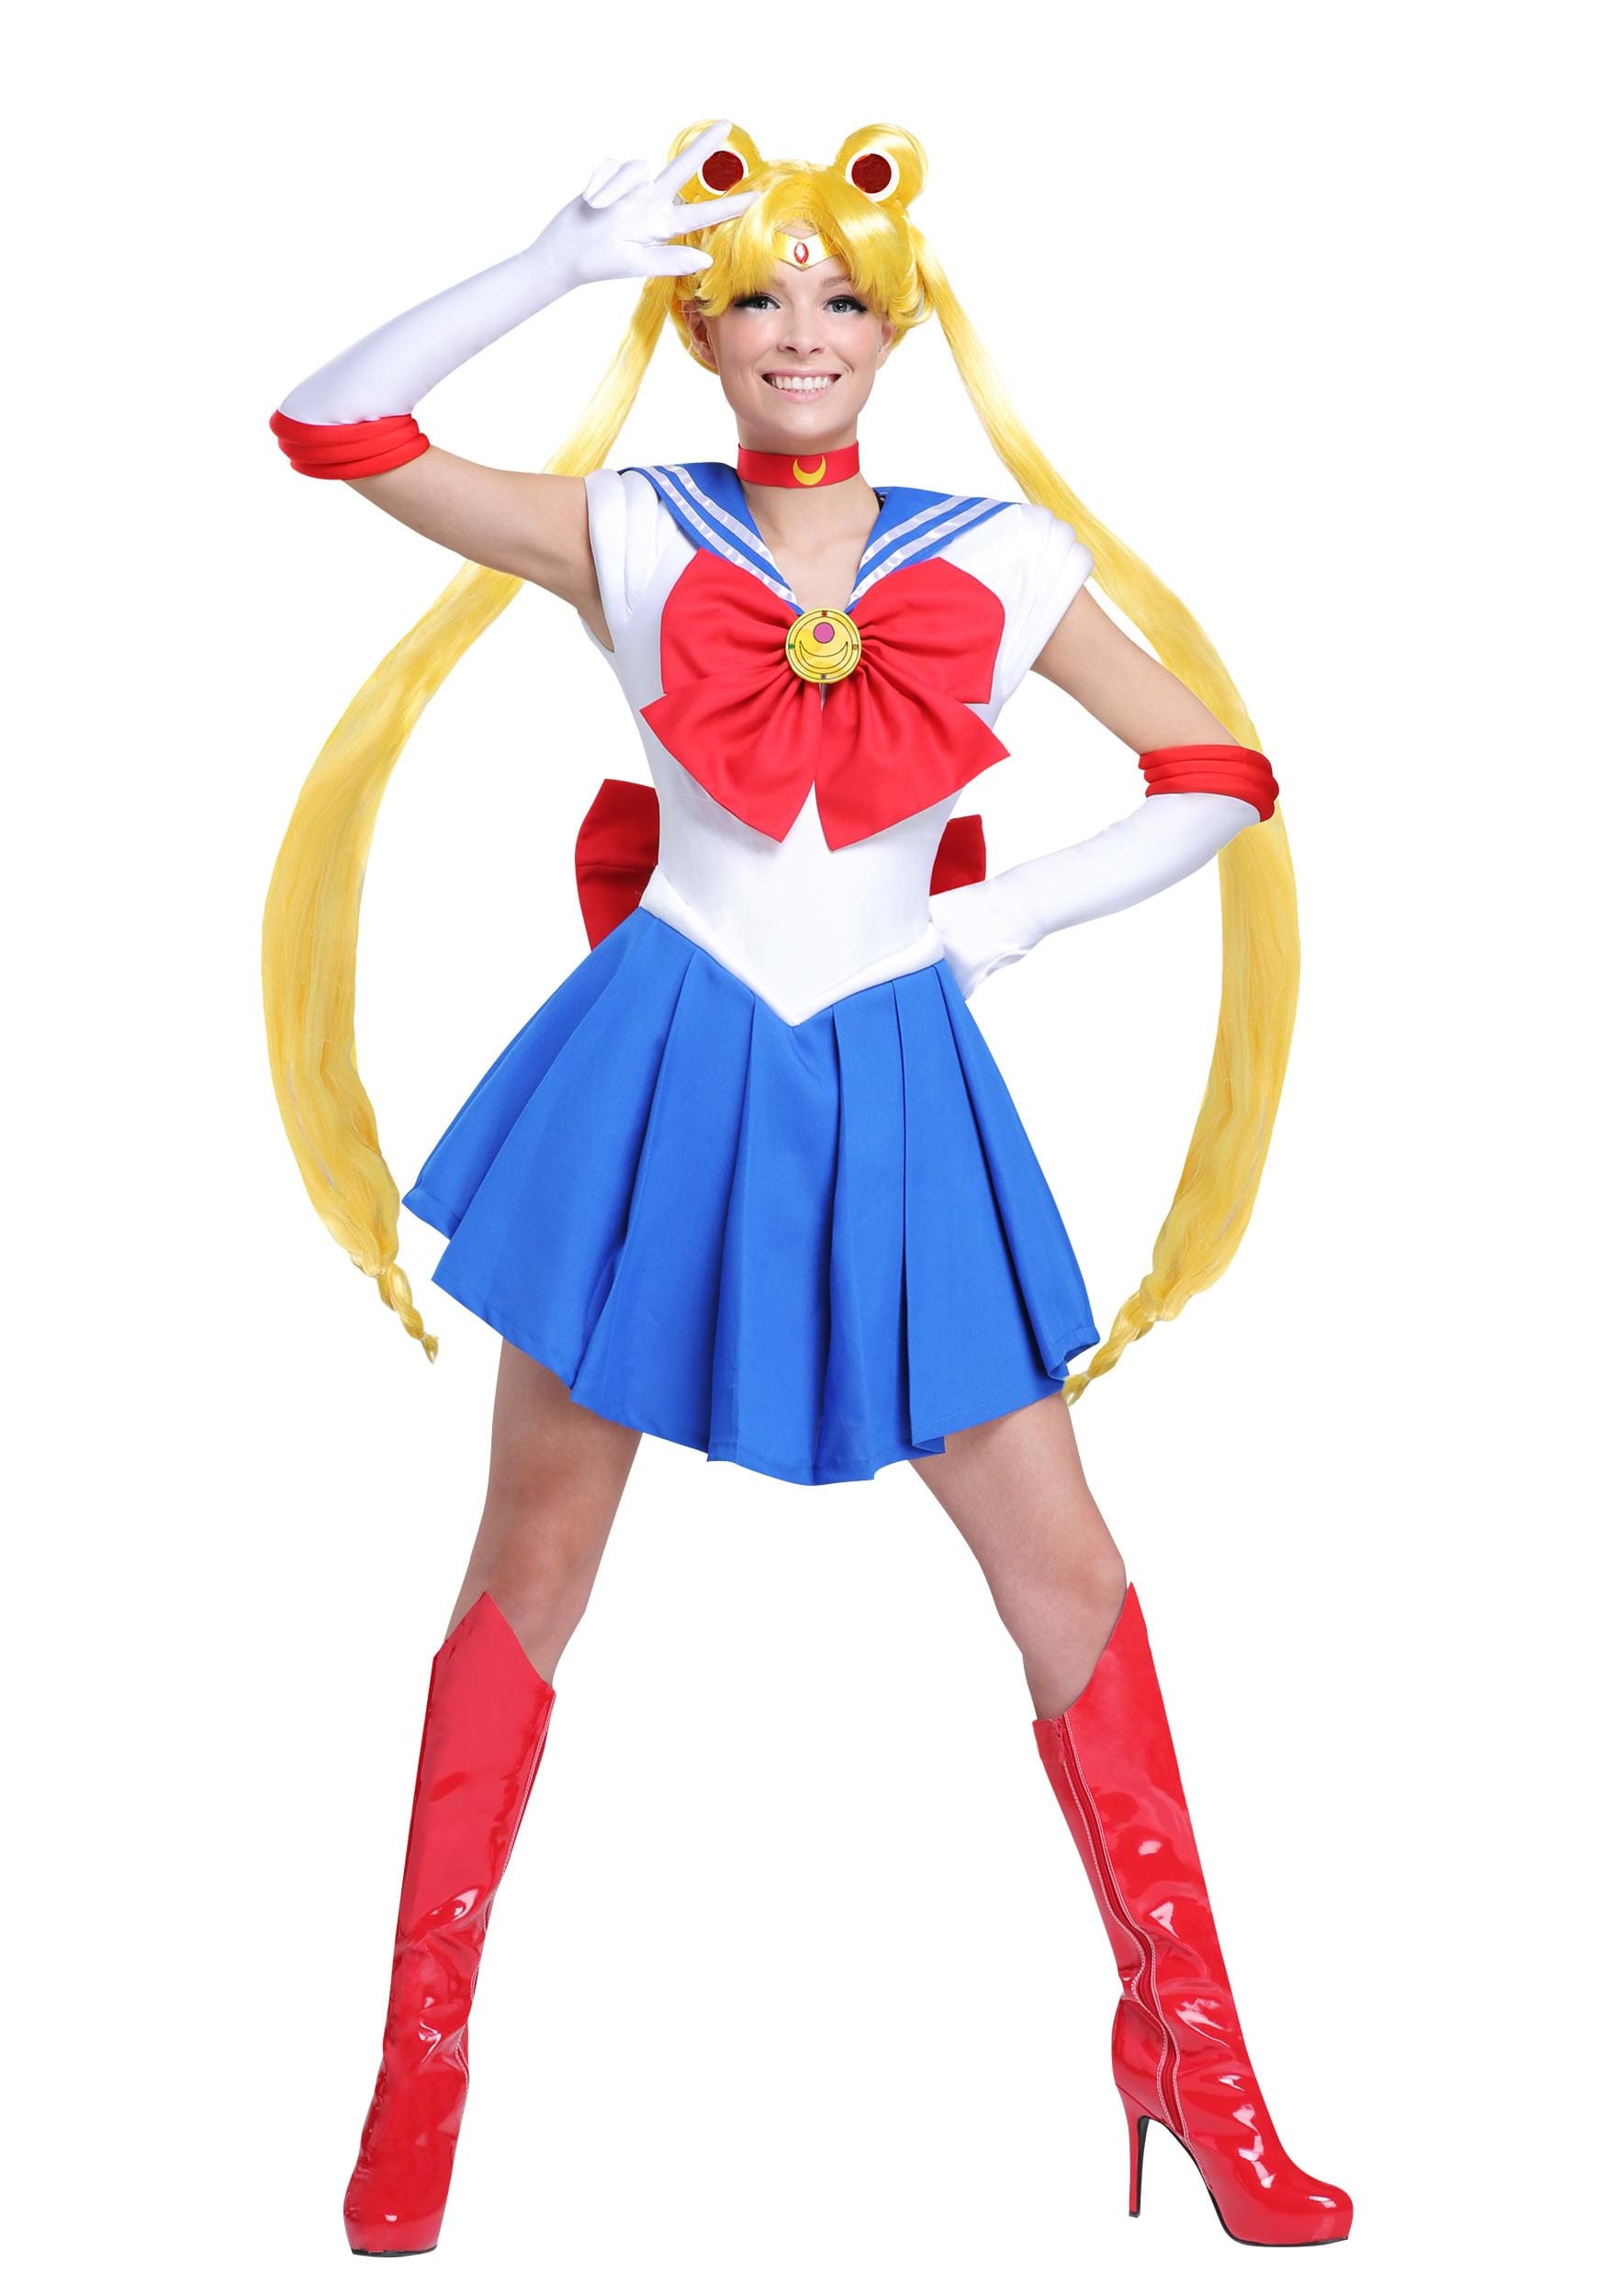 Photos - Fancy Dress MOON FUN Costumes Sailor  Costume Blue/Red/White 